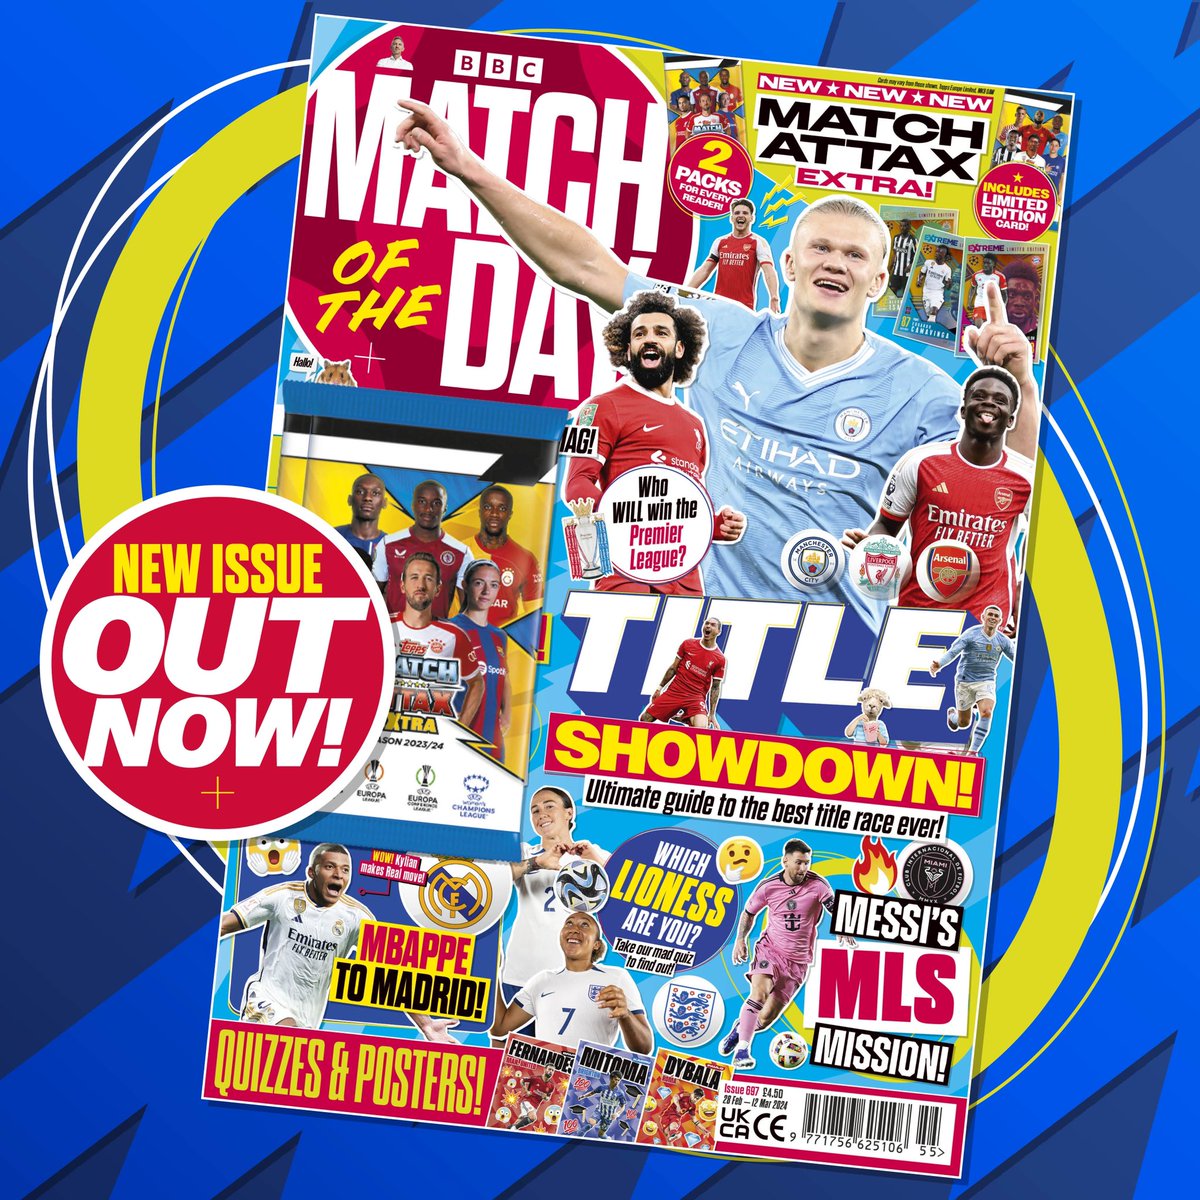 💪🏆 𝐓𝐈𝐓𝐋𝐄 𝐒𝐇𝐎𝐖𝐃𝐎𝐖𝐍! 🏆💪 Featuring… 👑 Premier League title fight guide! 😱 TWO packs of Match Attax Extra! 📚 #WorldBookDay fun! ✈️ Mbappe’s massive move! 🦁 Well silly Lioness quiz! 🤪 Emoji posters, epic LOLs and more! Tell your kids - it’s OUT NOW!